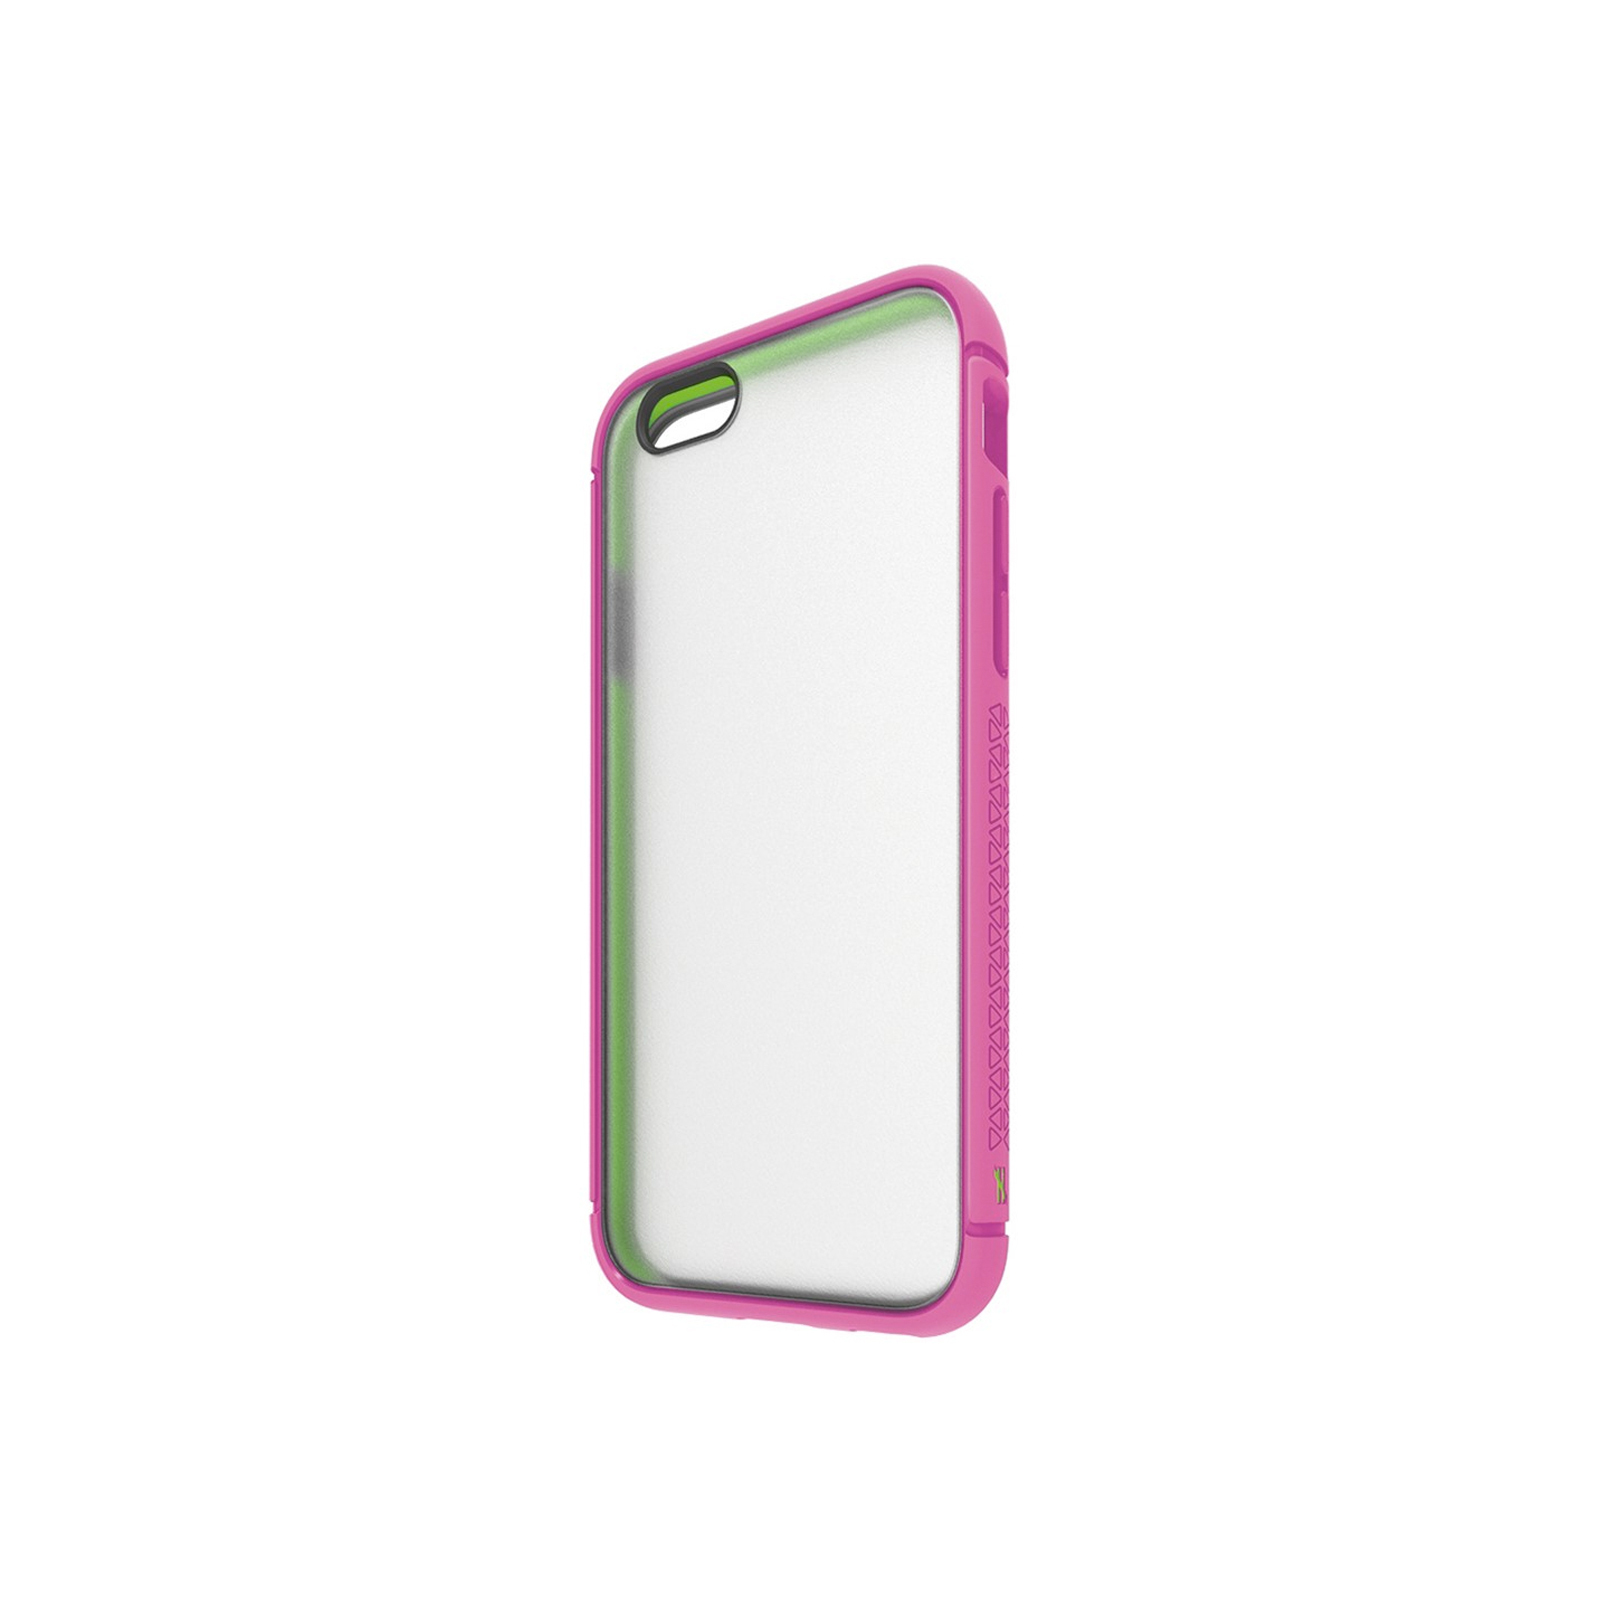 Contact iPhone 6 / 7 / 8 Case [Pink]